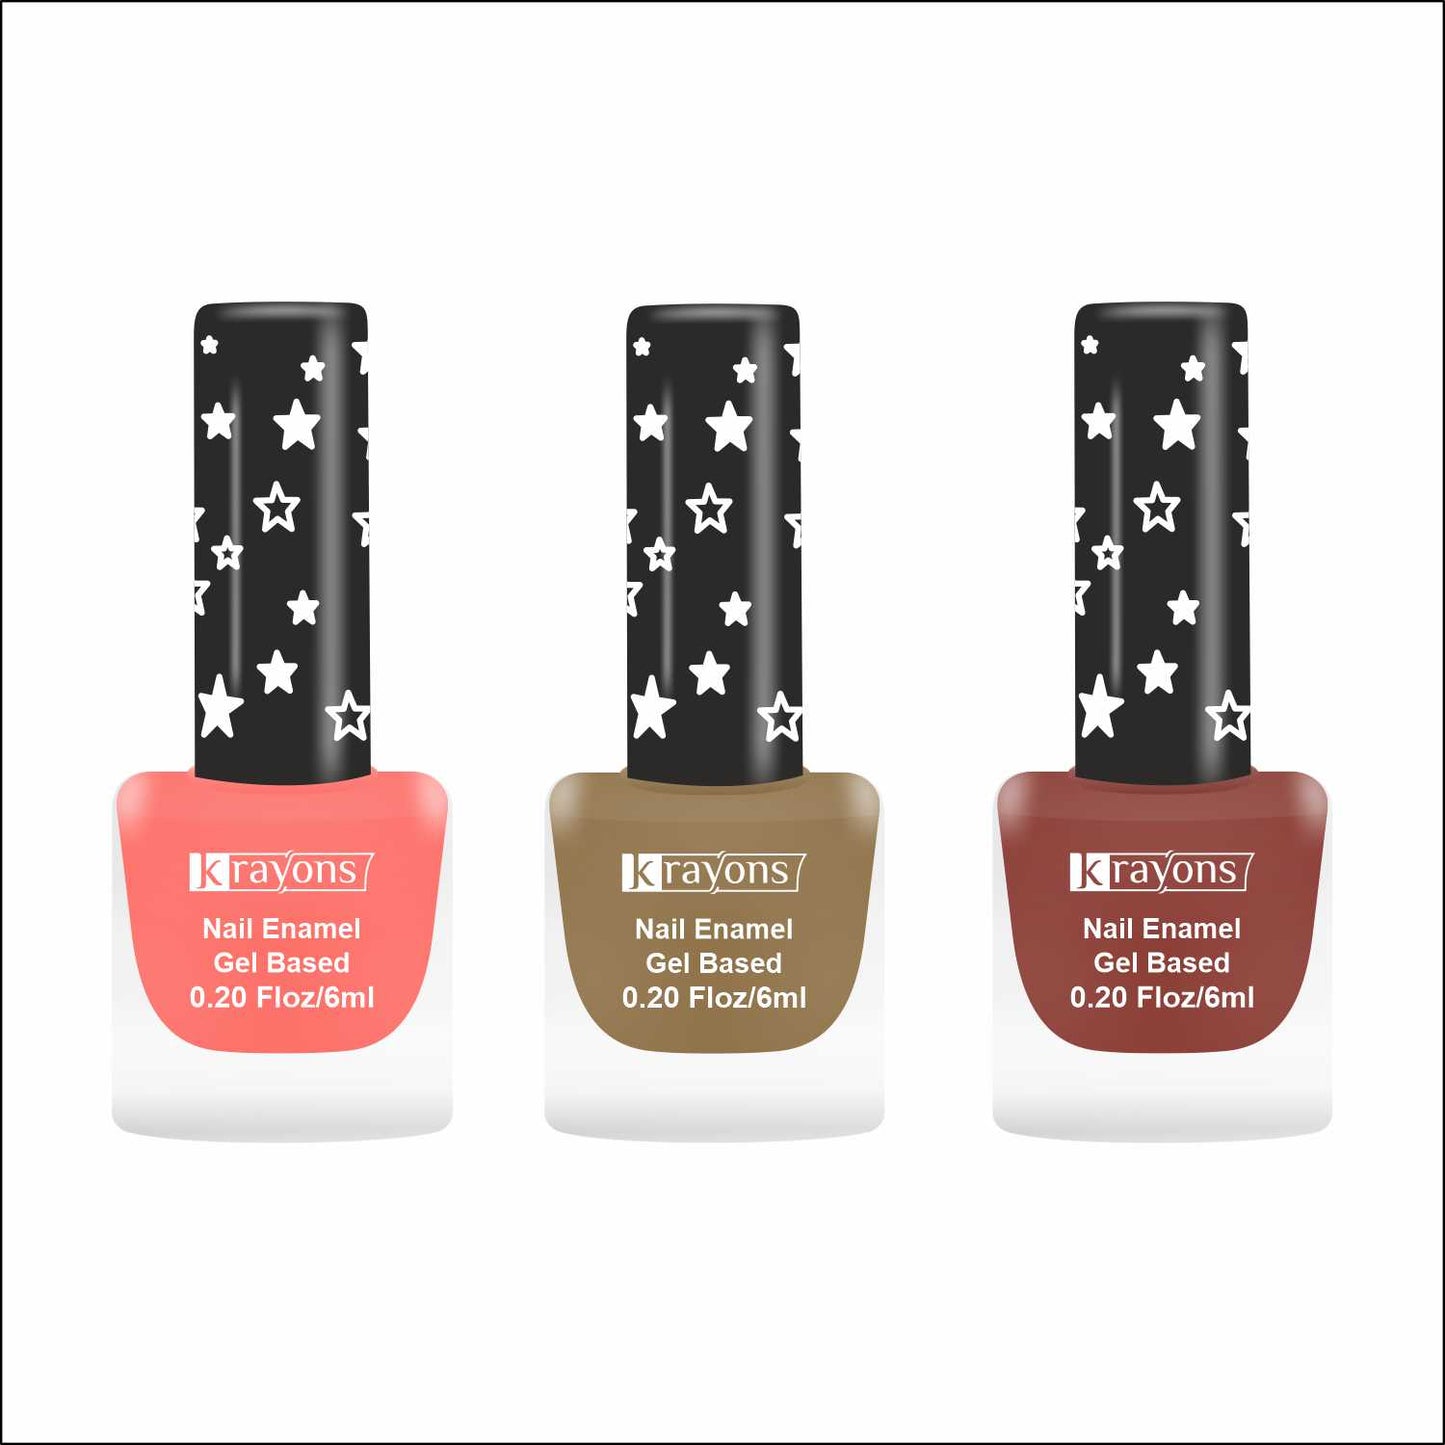 Krayons Cute Super Matte Finish Nail Enamel, Quick Dry, LongLasting, Blossom Peach, Nude Beige, Chestnut Matte, 6ml Each (Pack of 3)